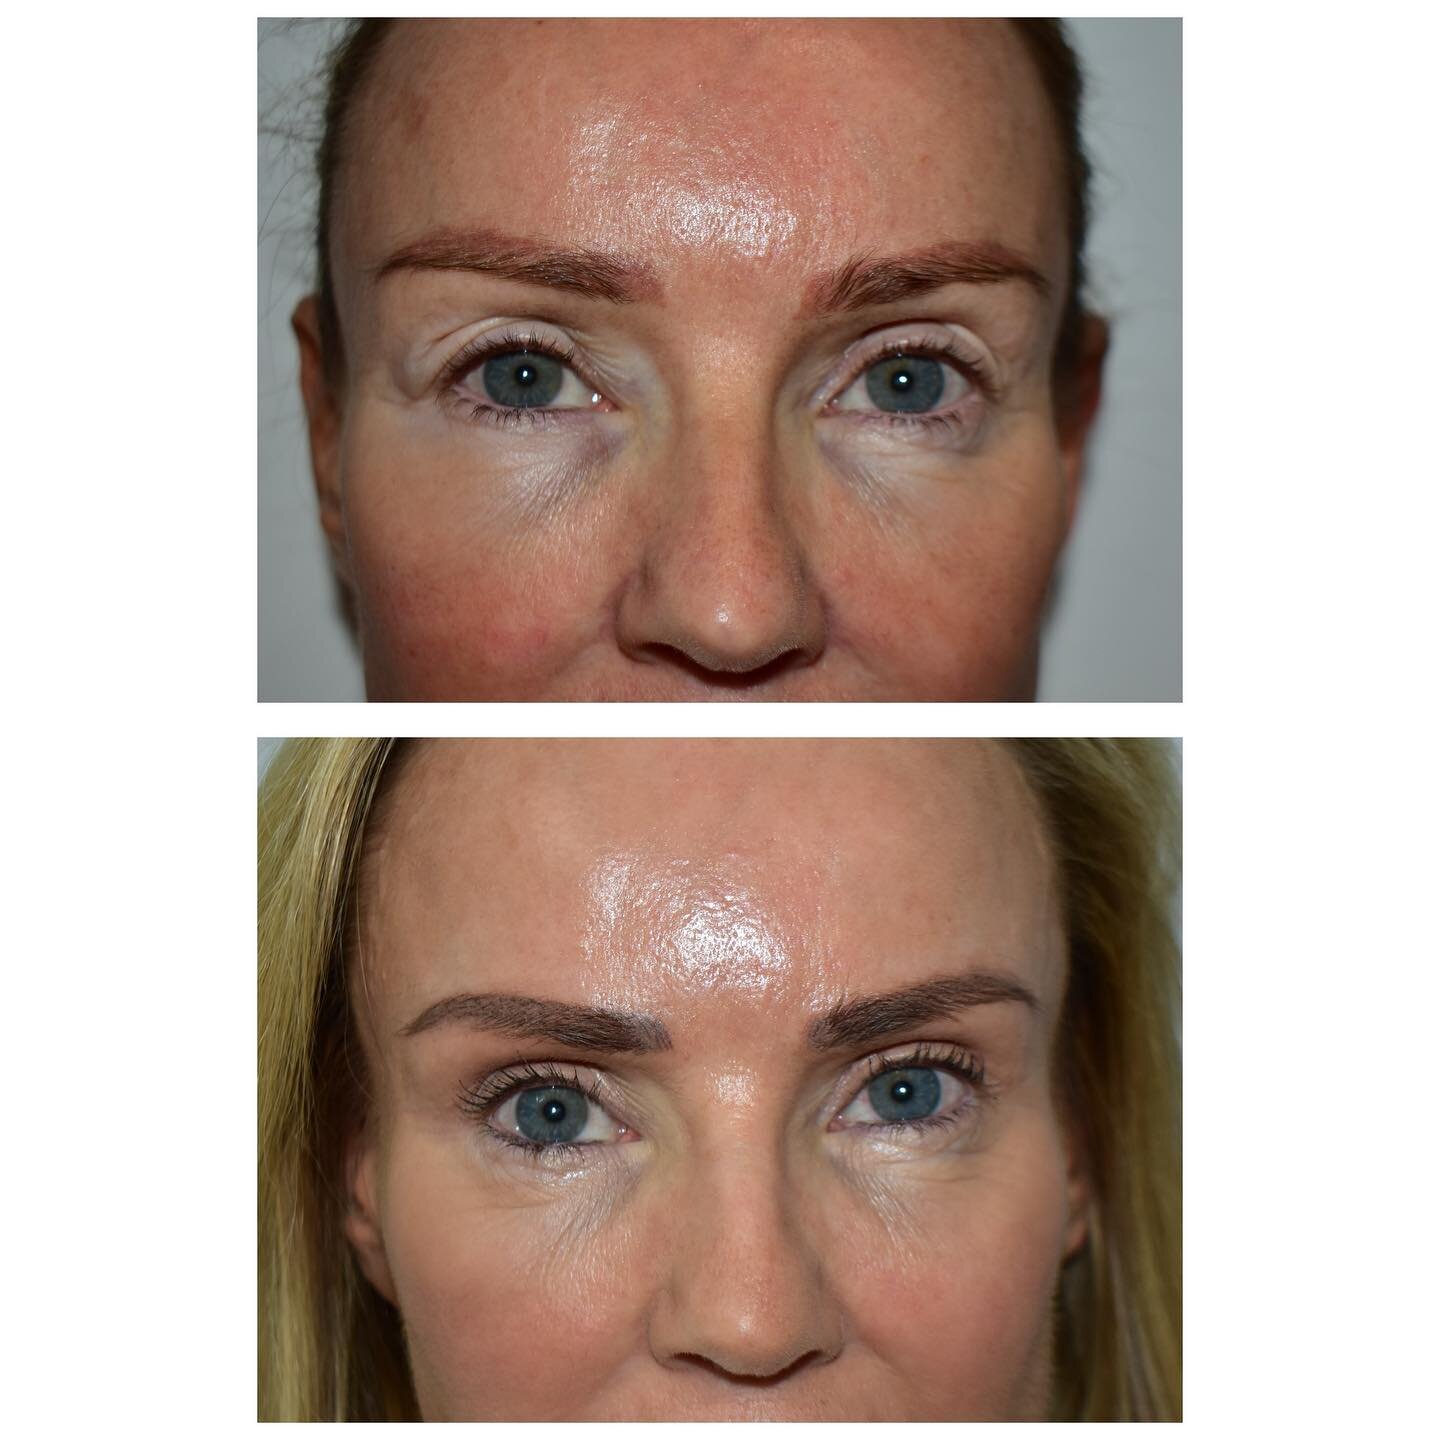 Upper and Lower Blepharoplasty.

The operation to correct premature ageing of the eyelids is called Blepharoplasty.

It involves very careful removal of excess skin and fat of the upper and lower lids, both leaving very fine lines which are not visib